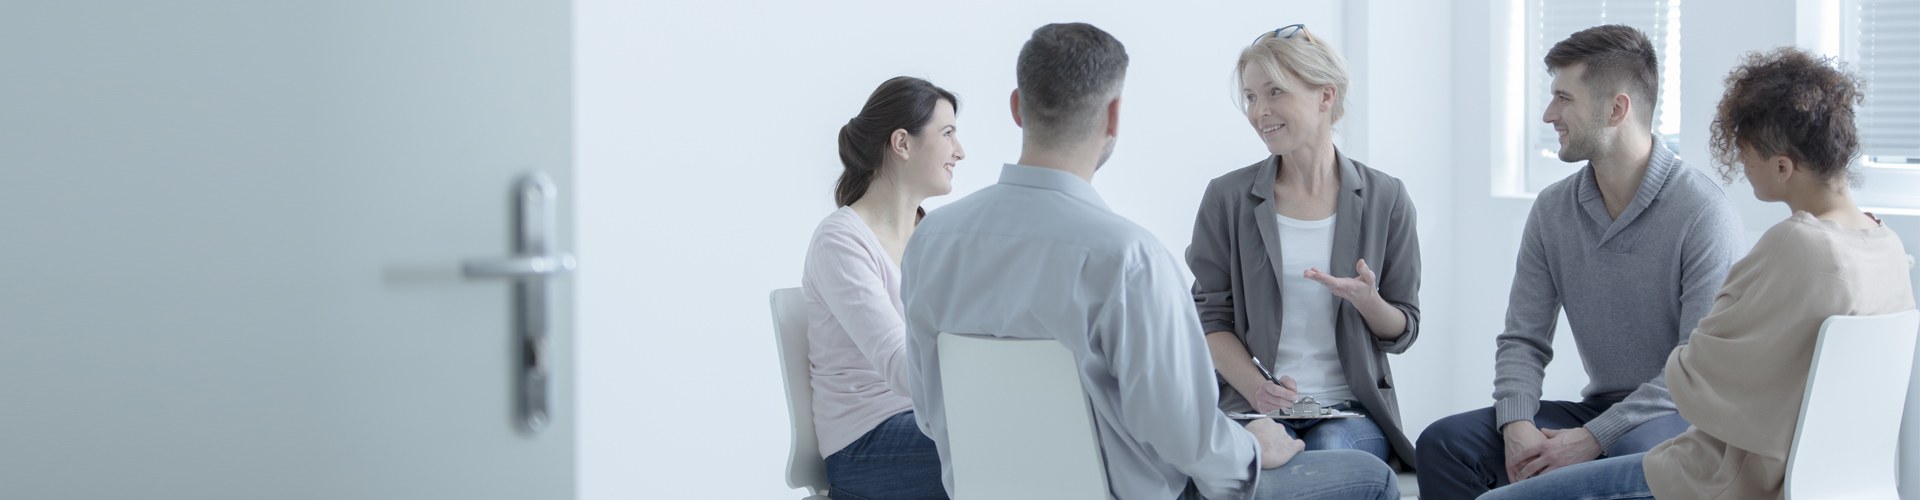 Close-up of psychotherapist listening to patient with anxiety disorder during group session